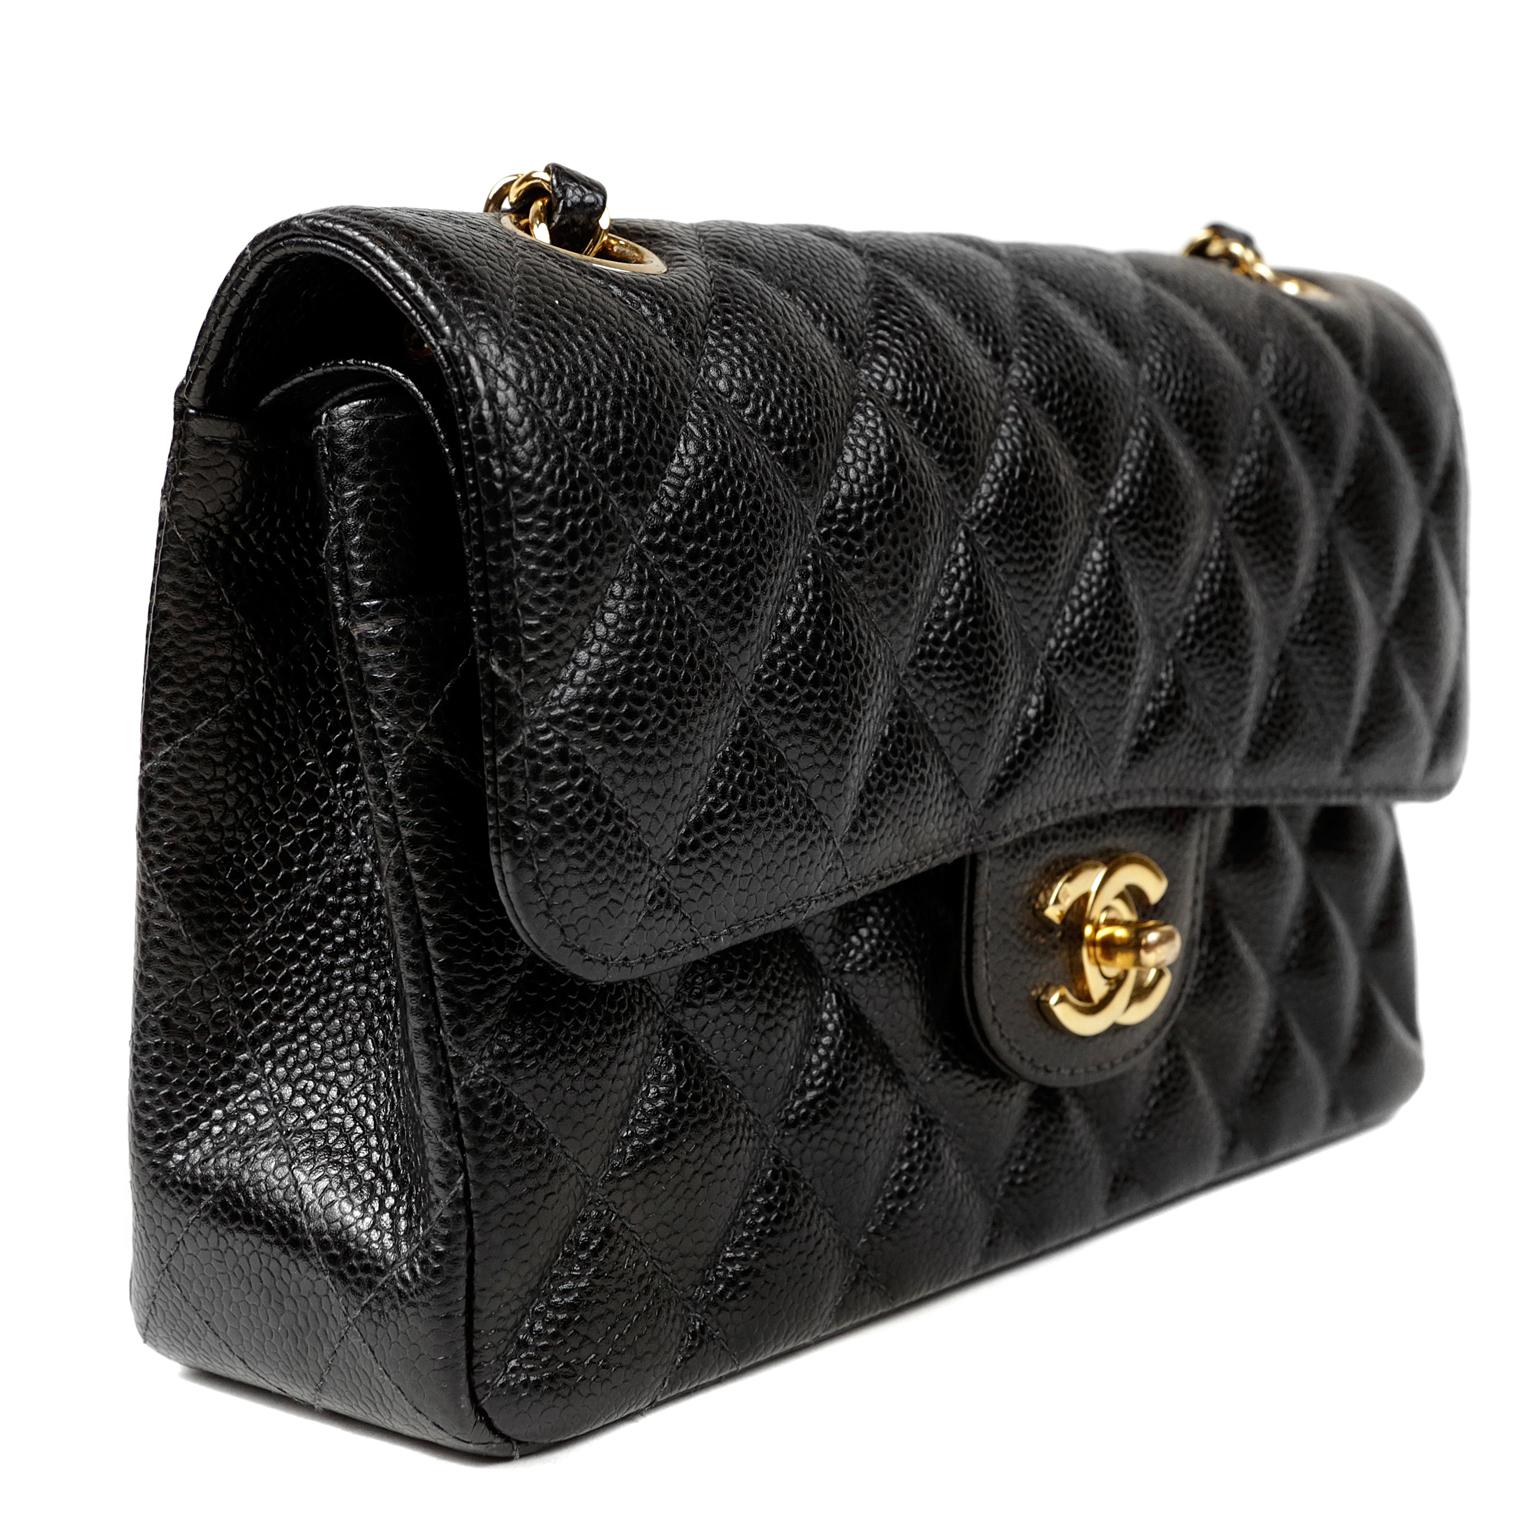 Chanel Black Caviar Small Classic Double Flap Bag with Gold Hardware 1